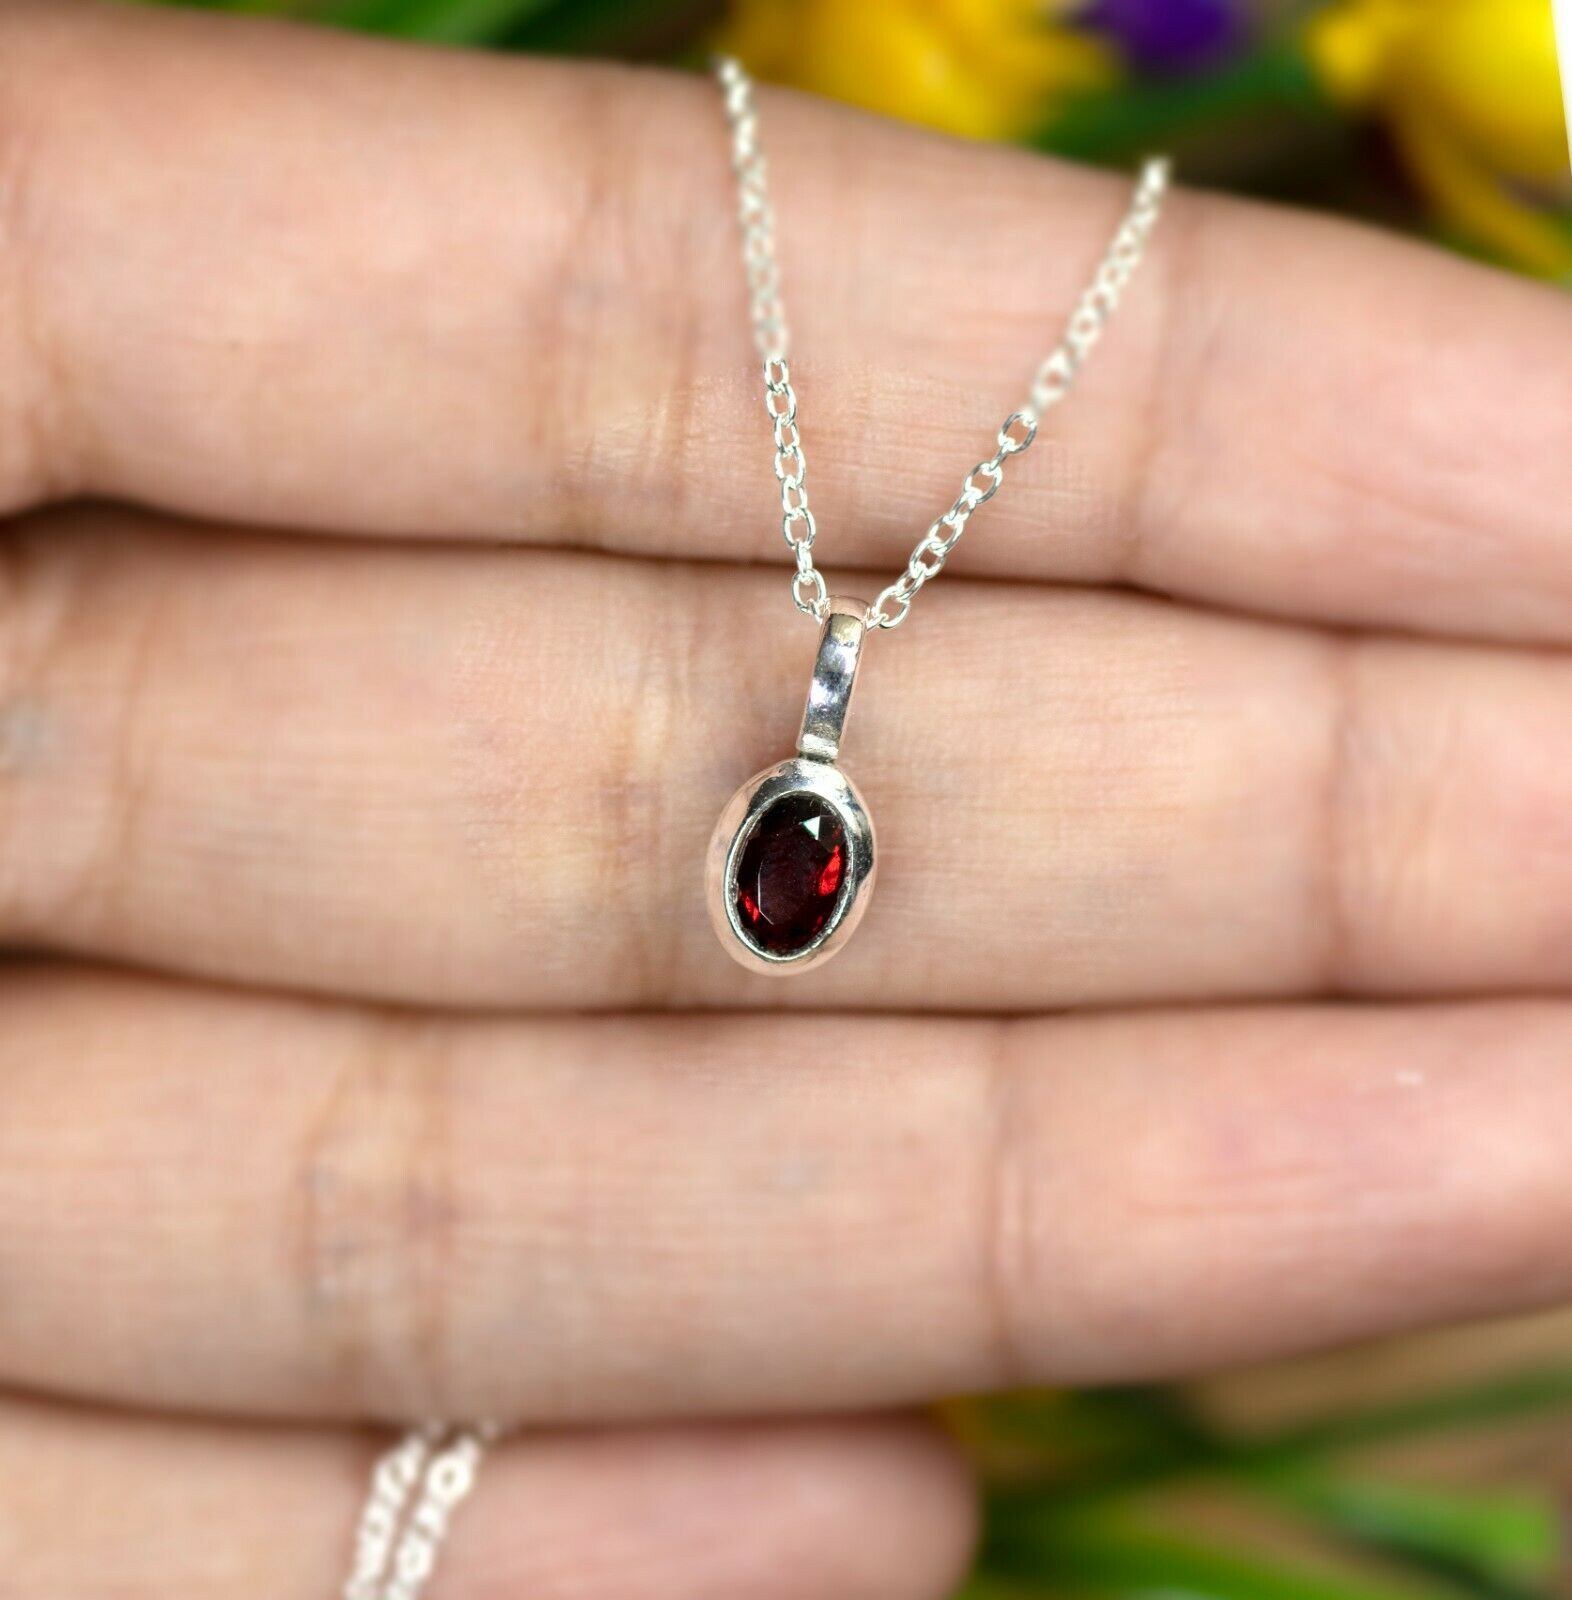 Small Oval Red Garnet Sterling 925 Silver Pendant Necklace Ladies Jewellery Gift